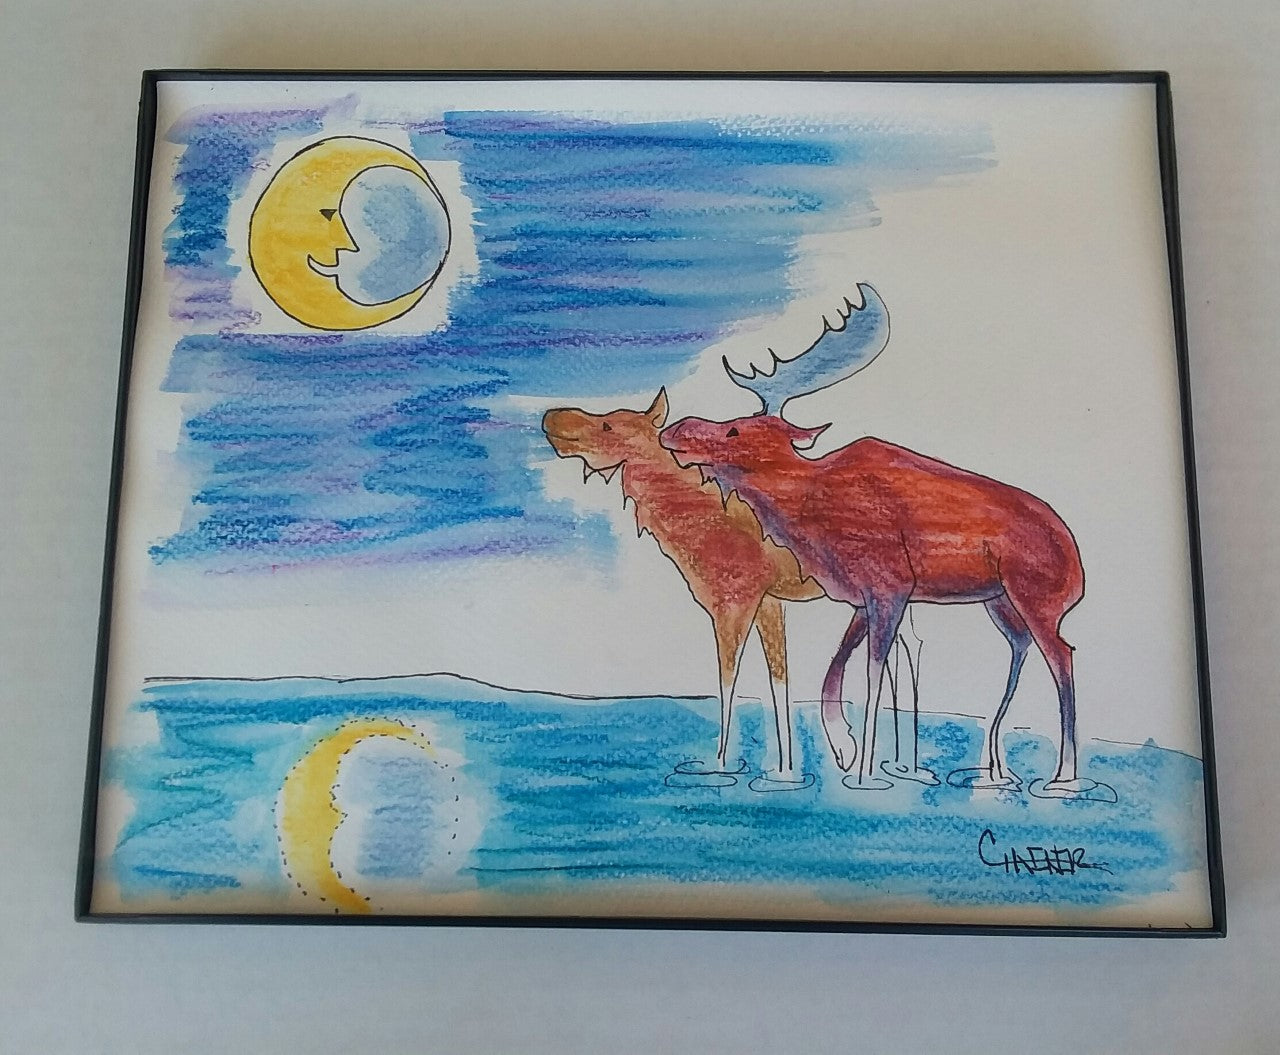 " Mooses Love Moon " Watercolor And Ink 8 x 10 Artist: Celeste Havener Original watercolor and ink drawing  Bull and cow moose looking up at the moon  Standing in water with moon reflection  10" long x 8" high x 1/2" wide in a small black frame with clear plastic cover